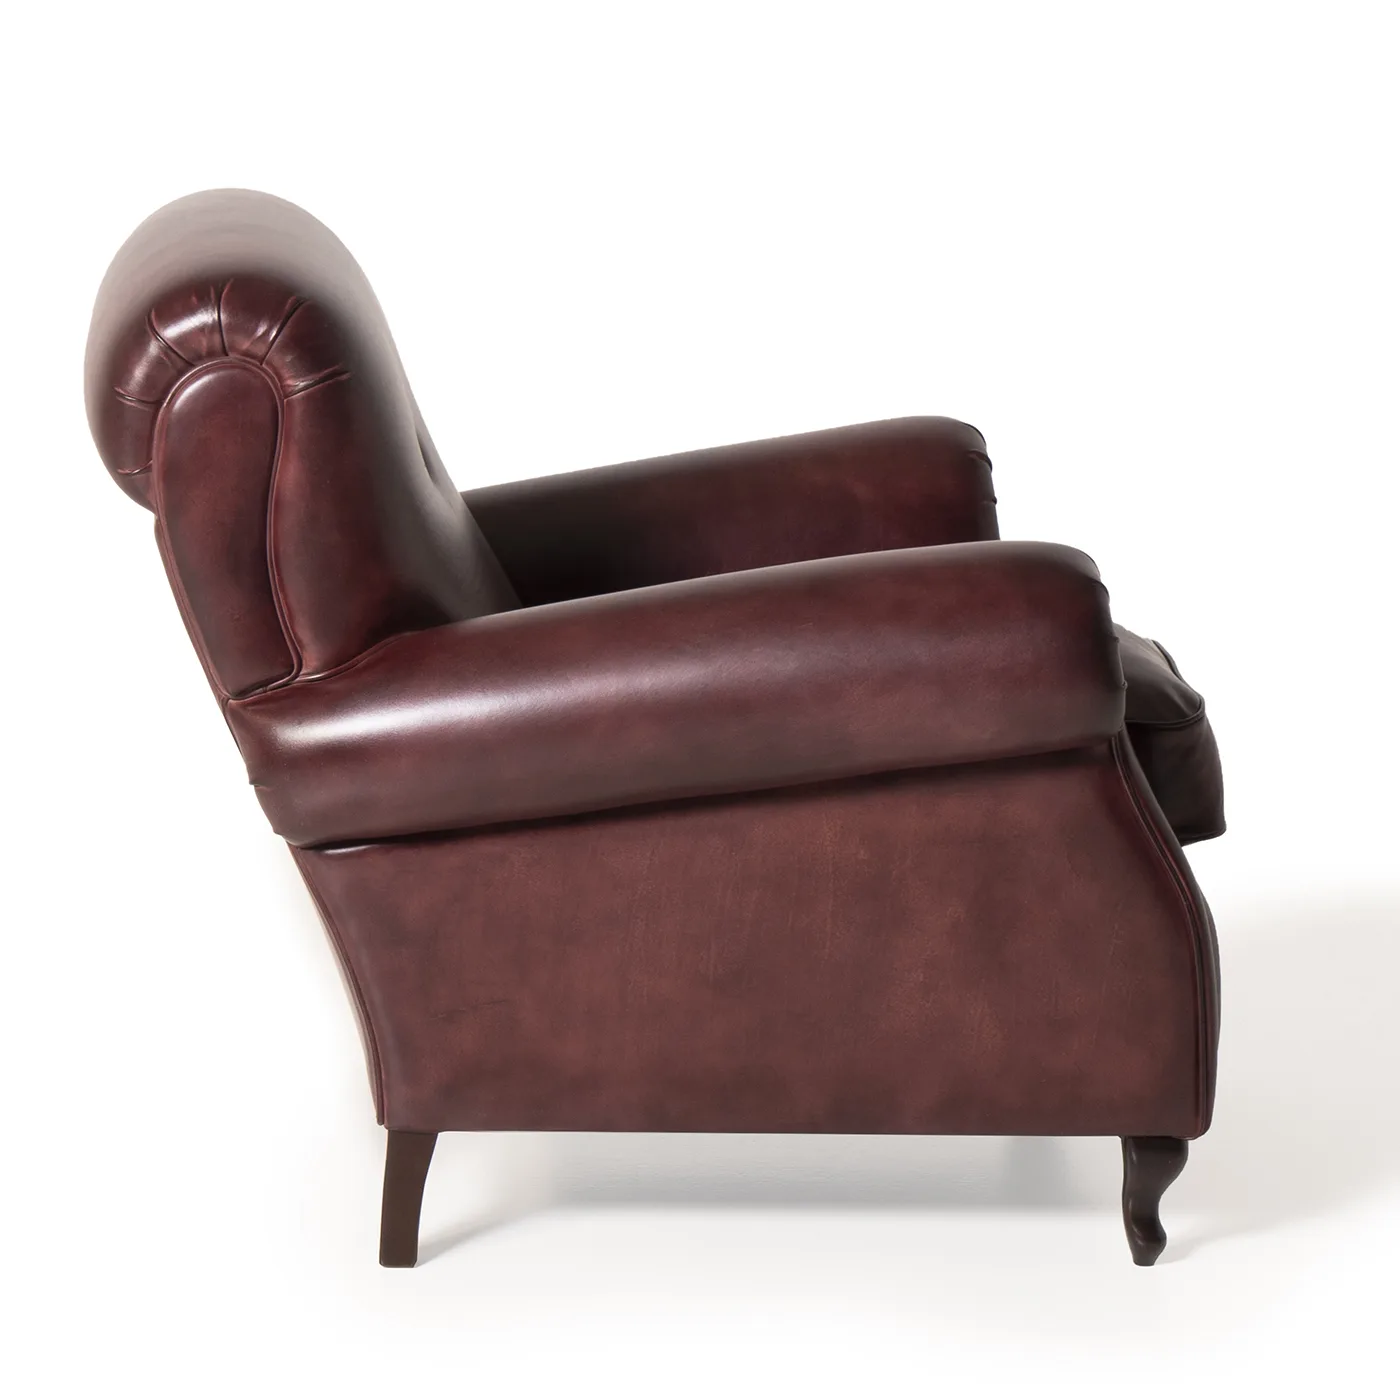 ROMA ARMCHAIR TRIBECA COLLECTION BY MARCO AND GIULIO MANTELLASSI